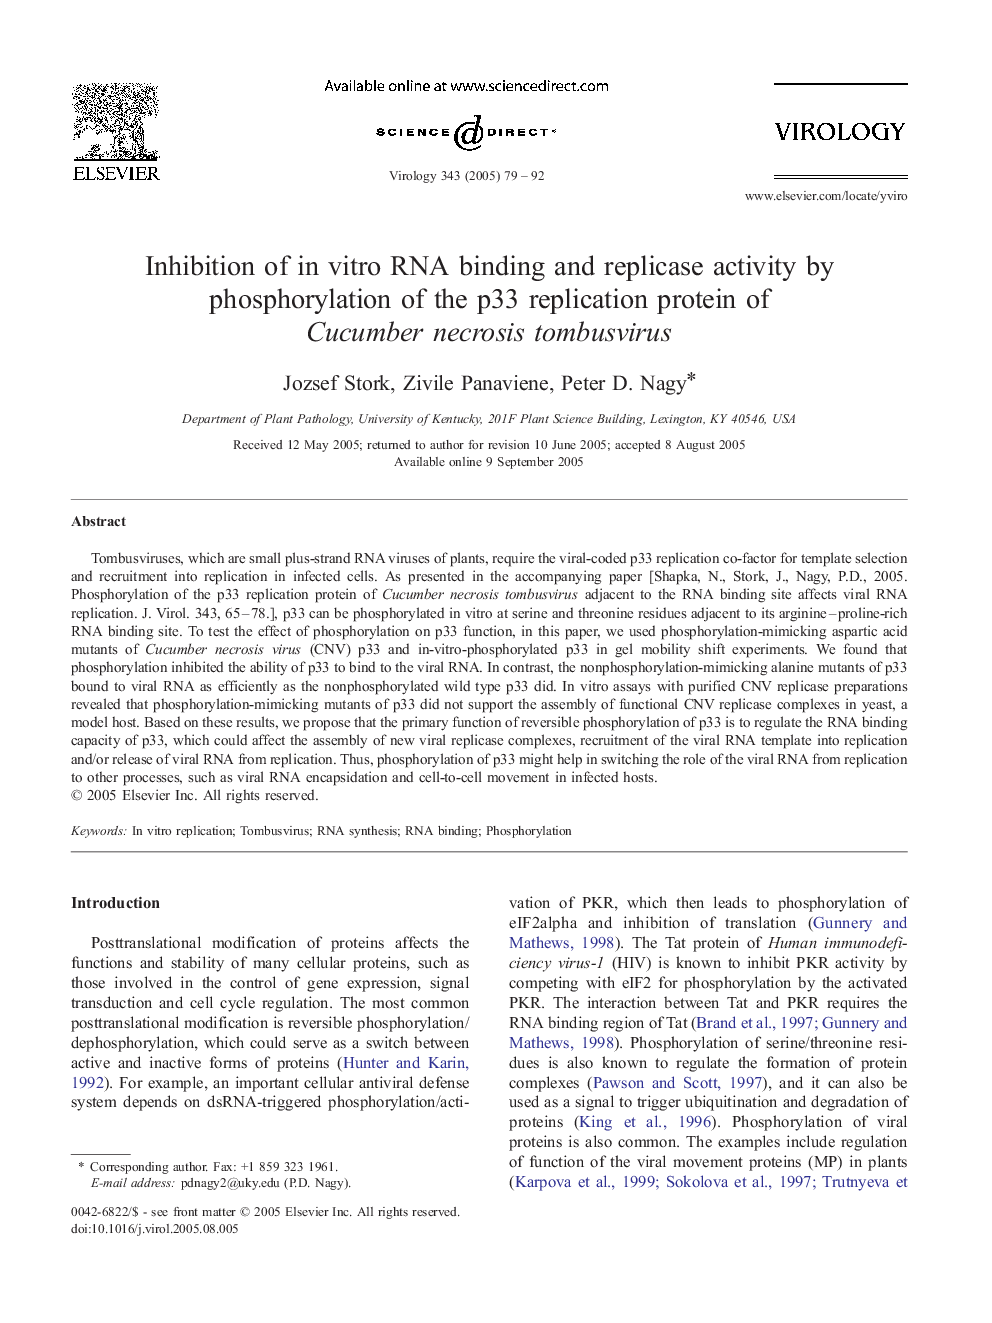 Inhibition of in vitro RNA binding and replicase activity by phosphorylation of the p33 replication protein of Cucumber necrosis tombusvirus